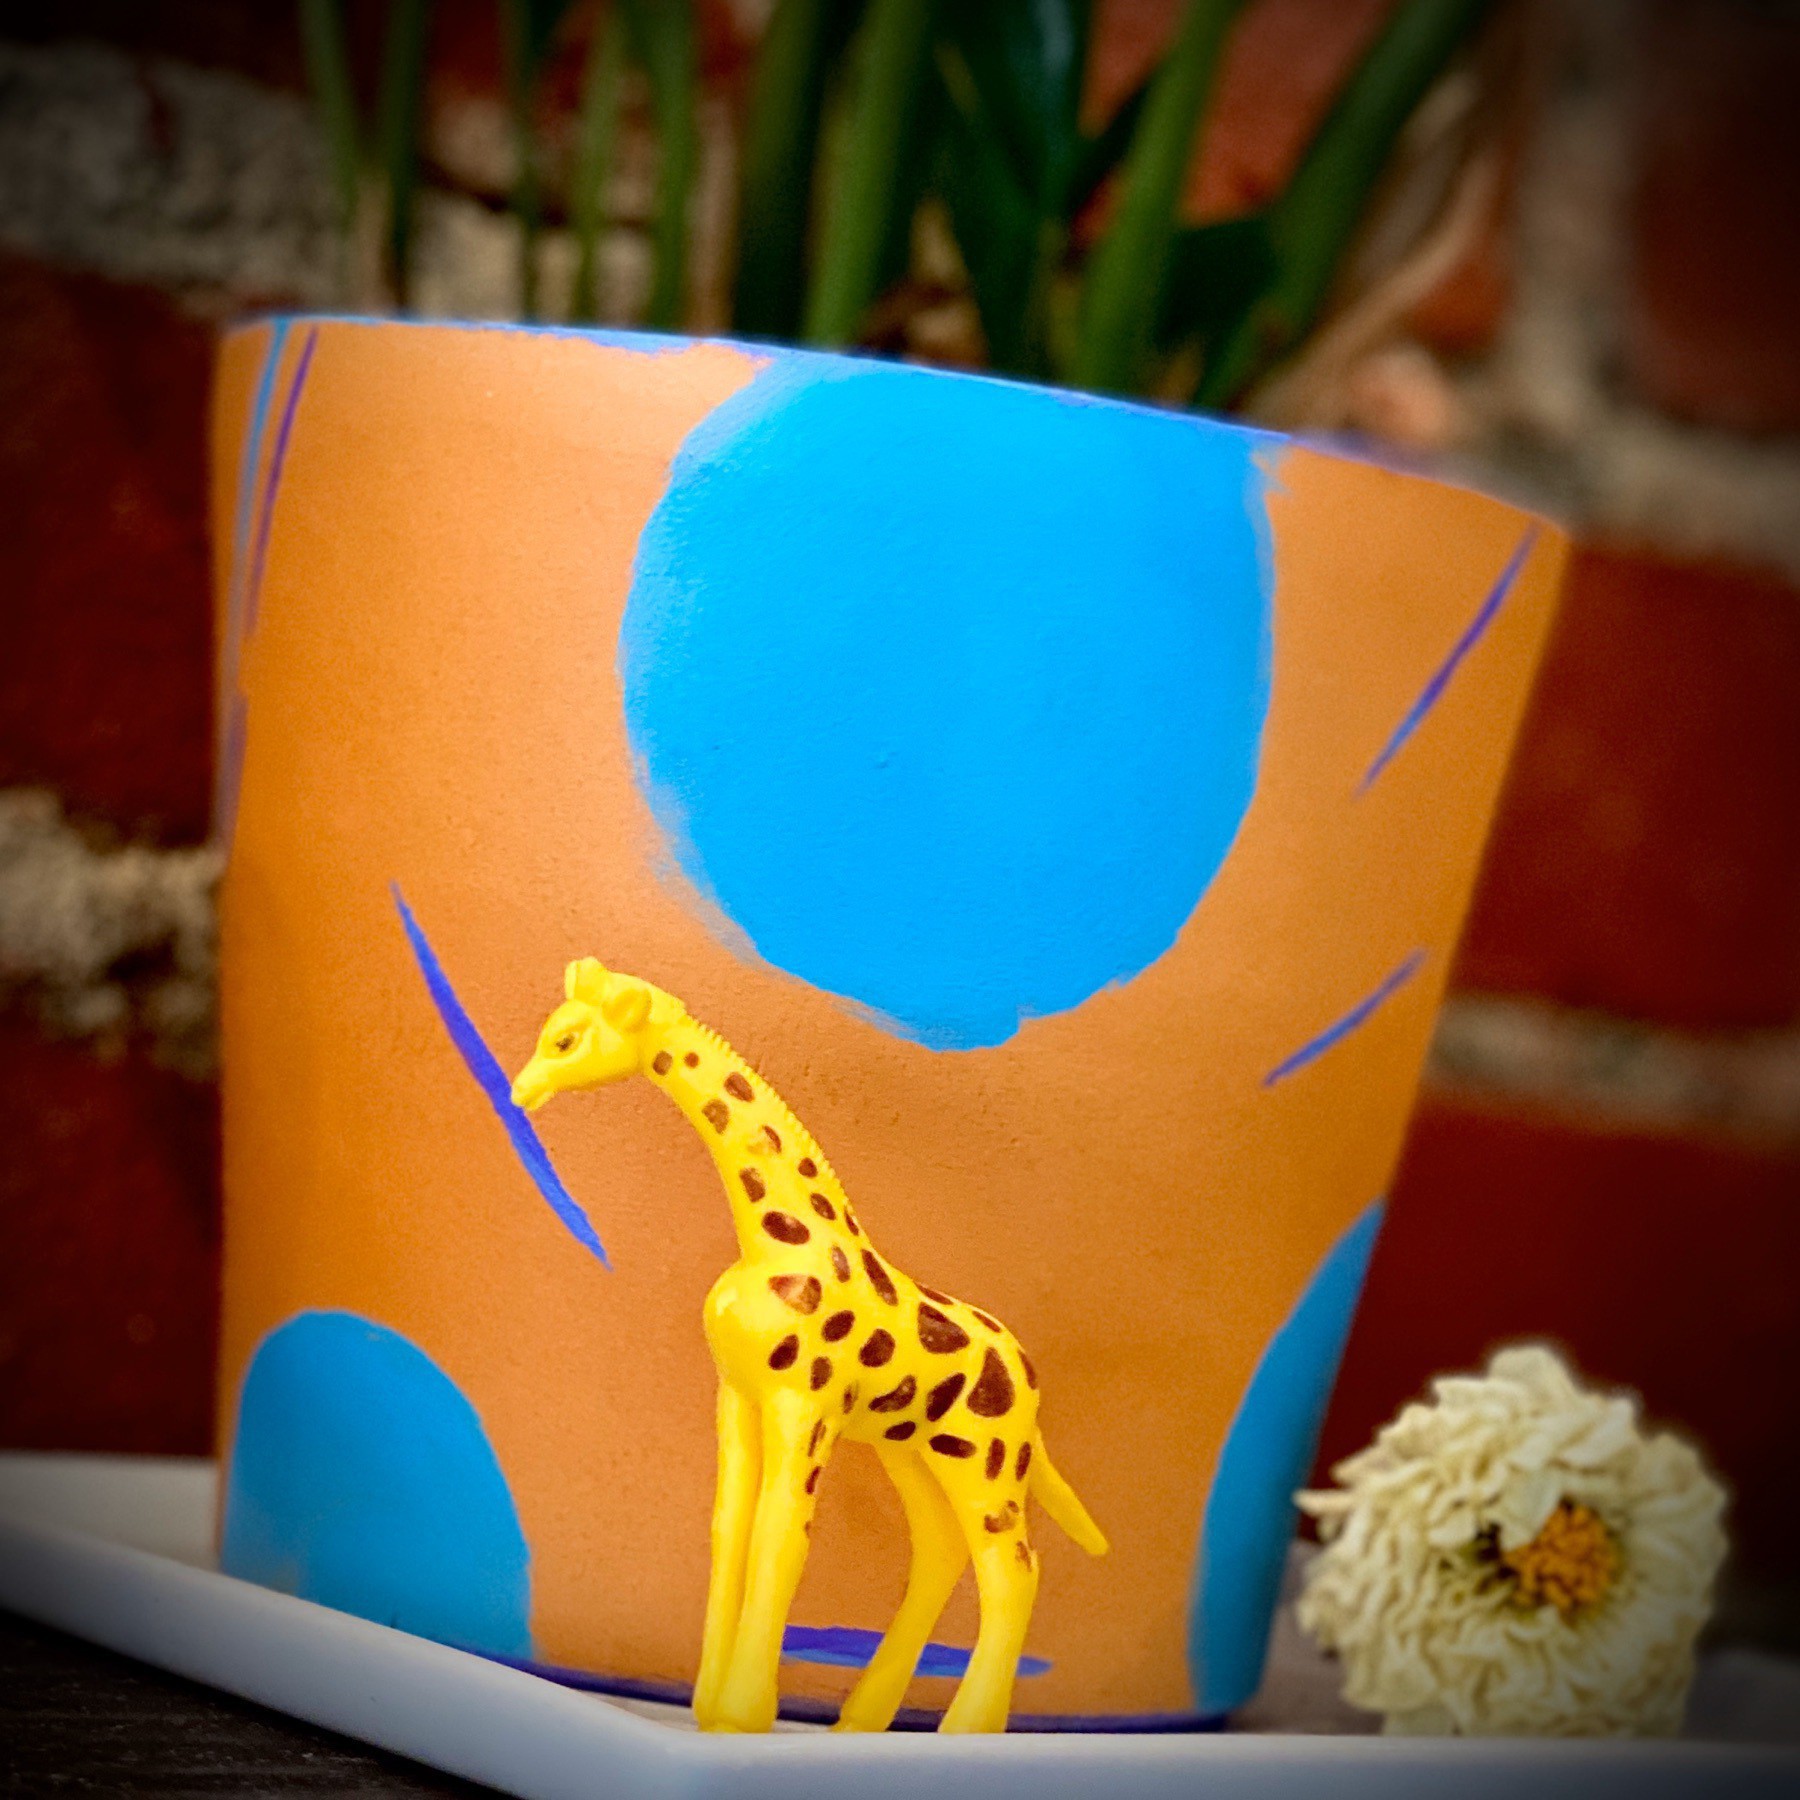 Small Giraffe figurine in front of potted plant.